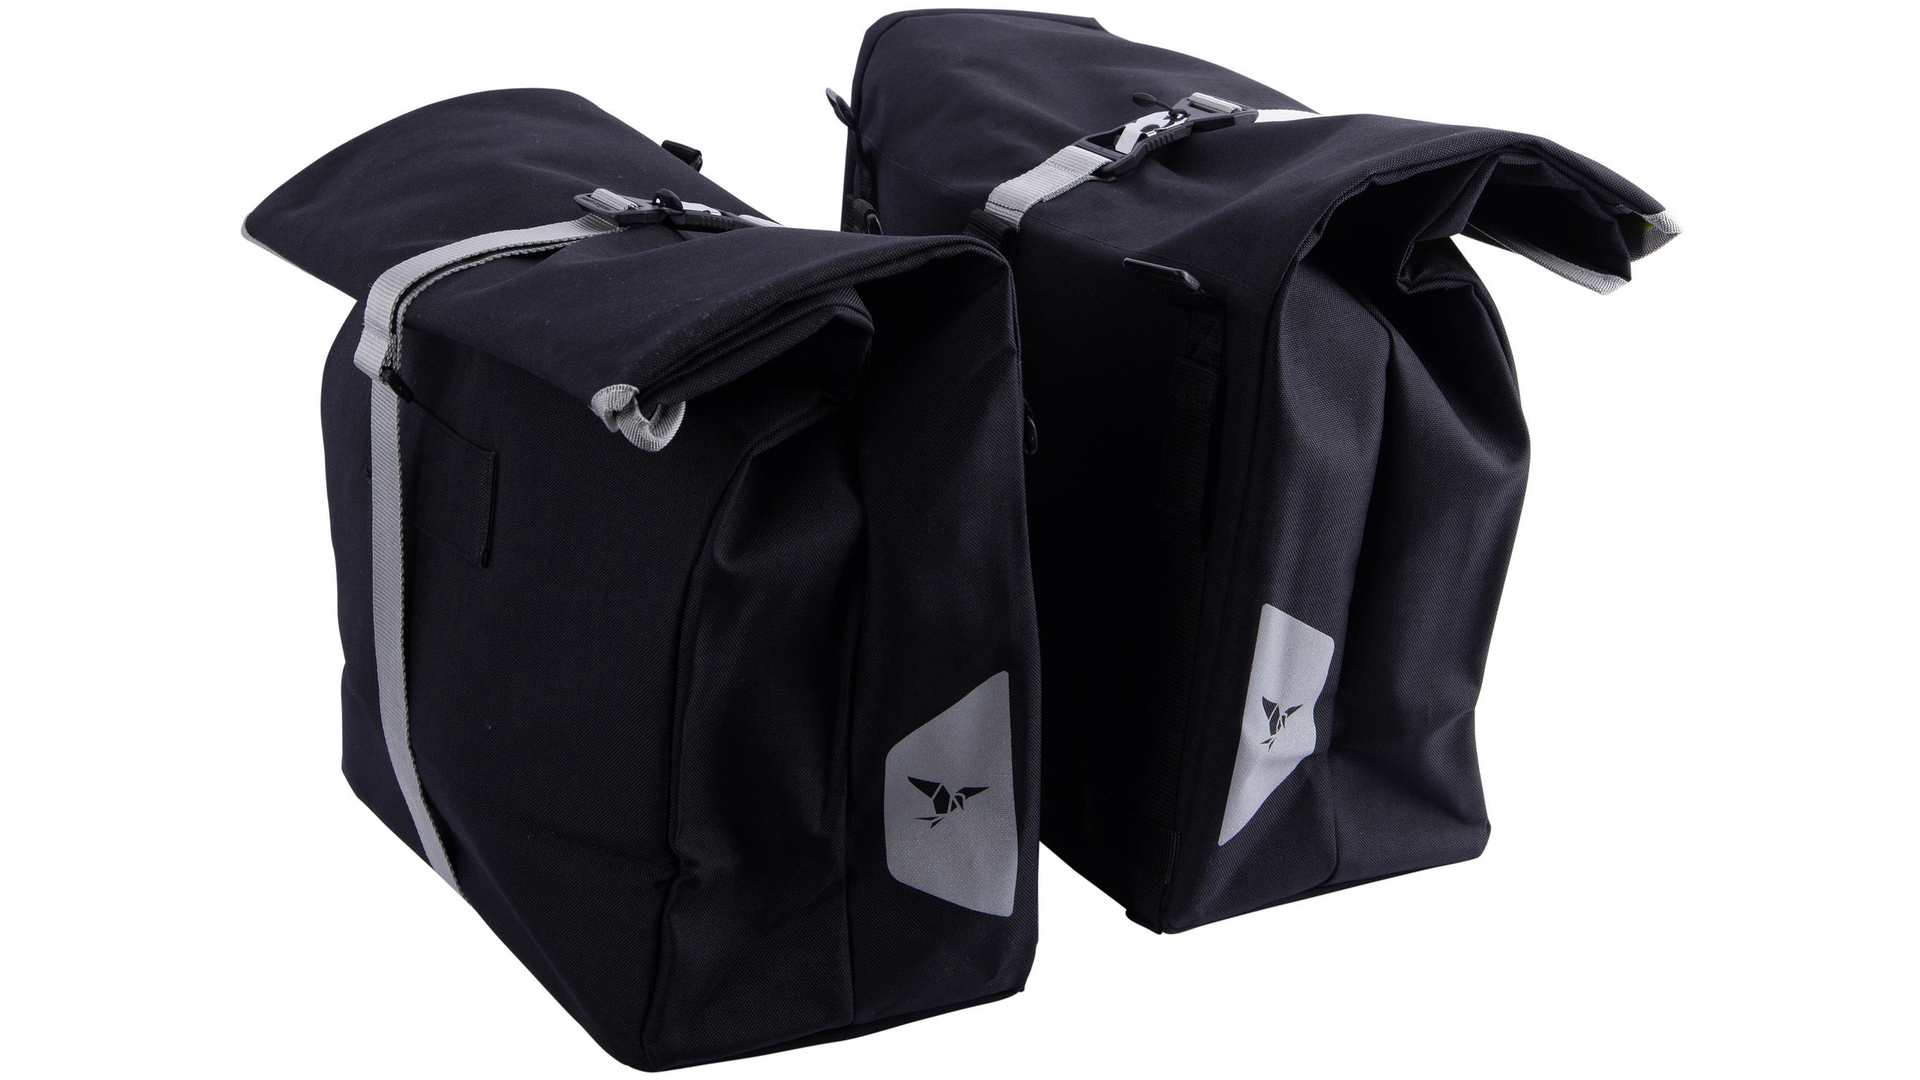 tern cargo hold 37 panniers